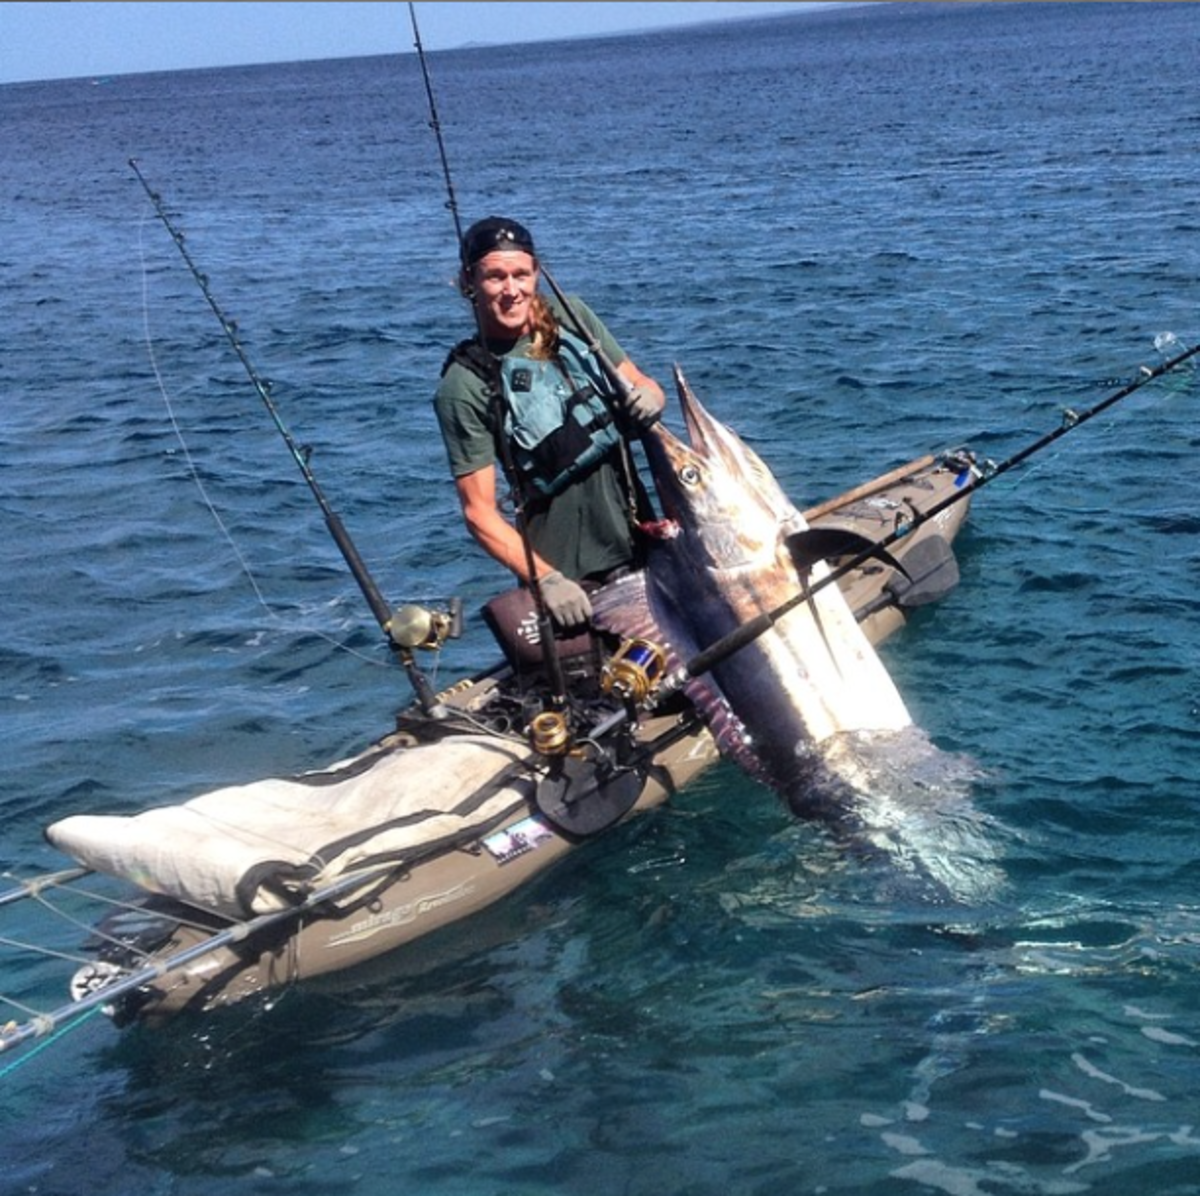 Kayak angler tosses rod overboard, catches record marlin - Men's